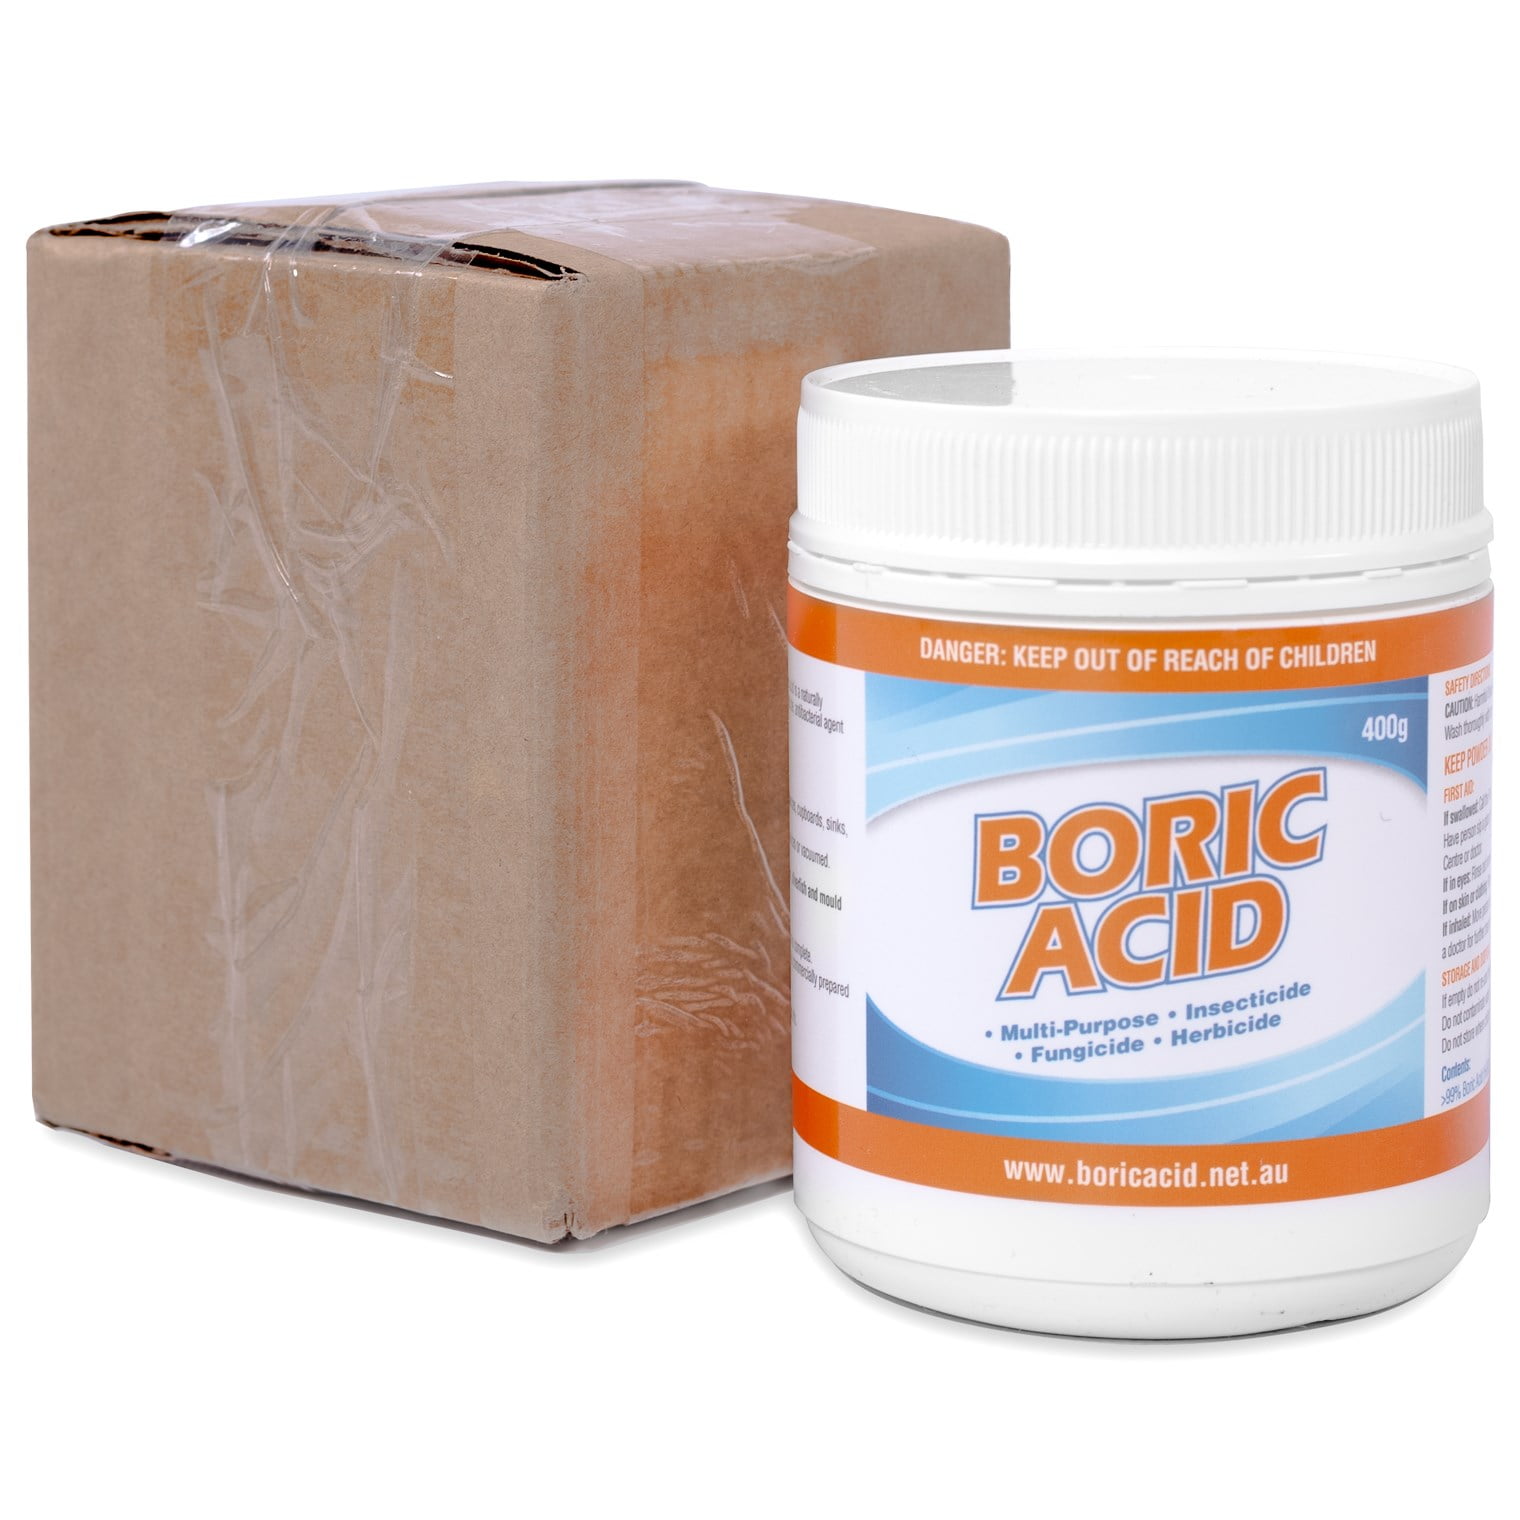 The packaging for a 400g jar of boric acid.